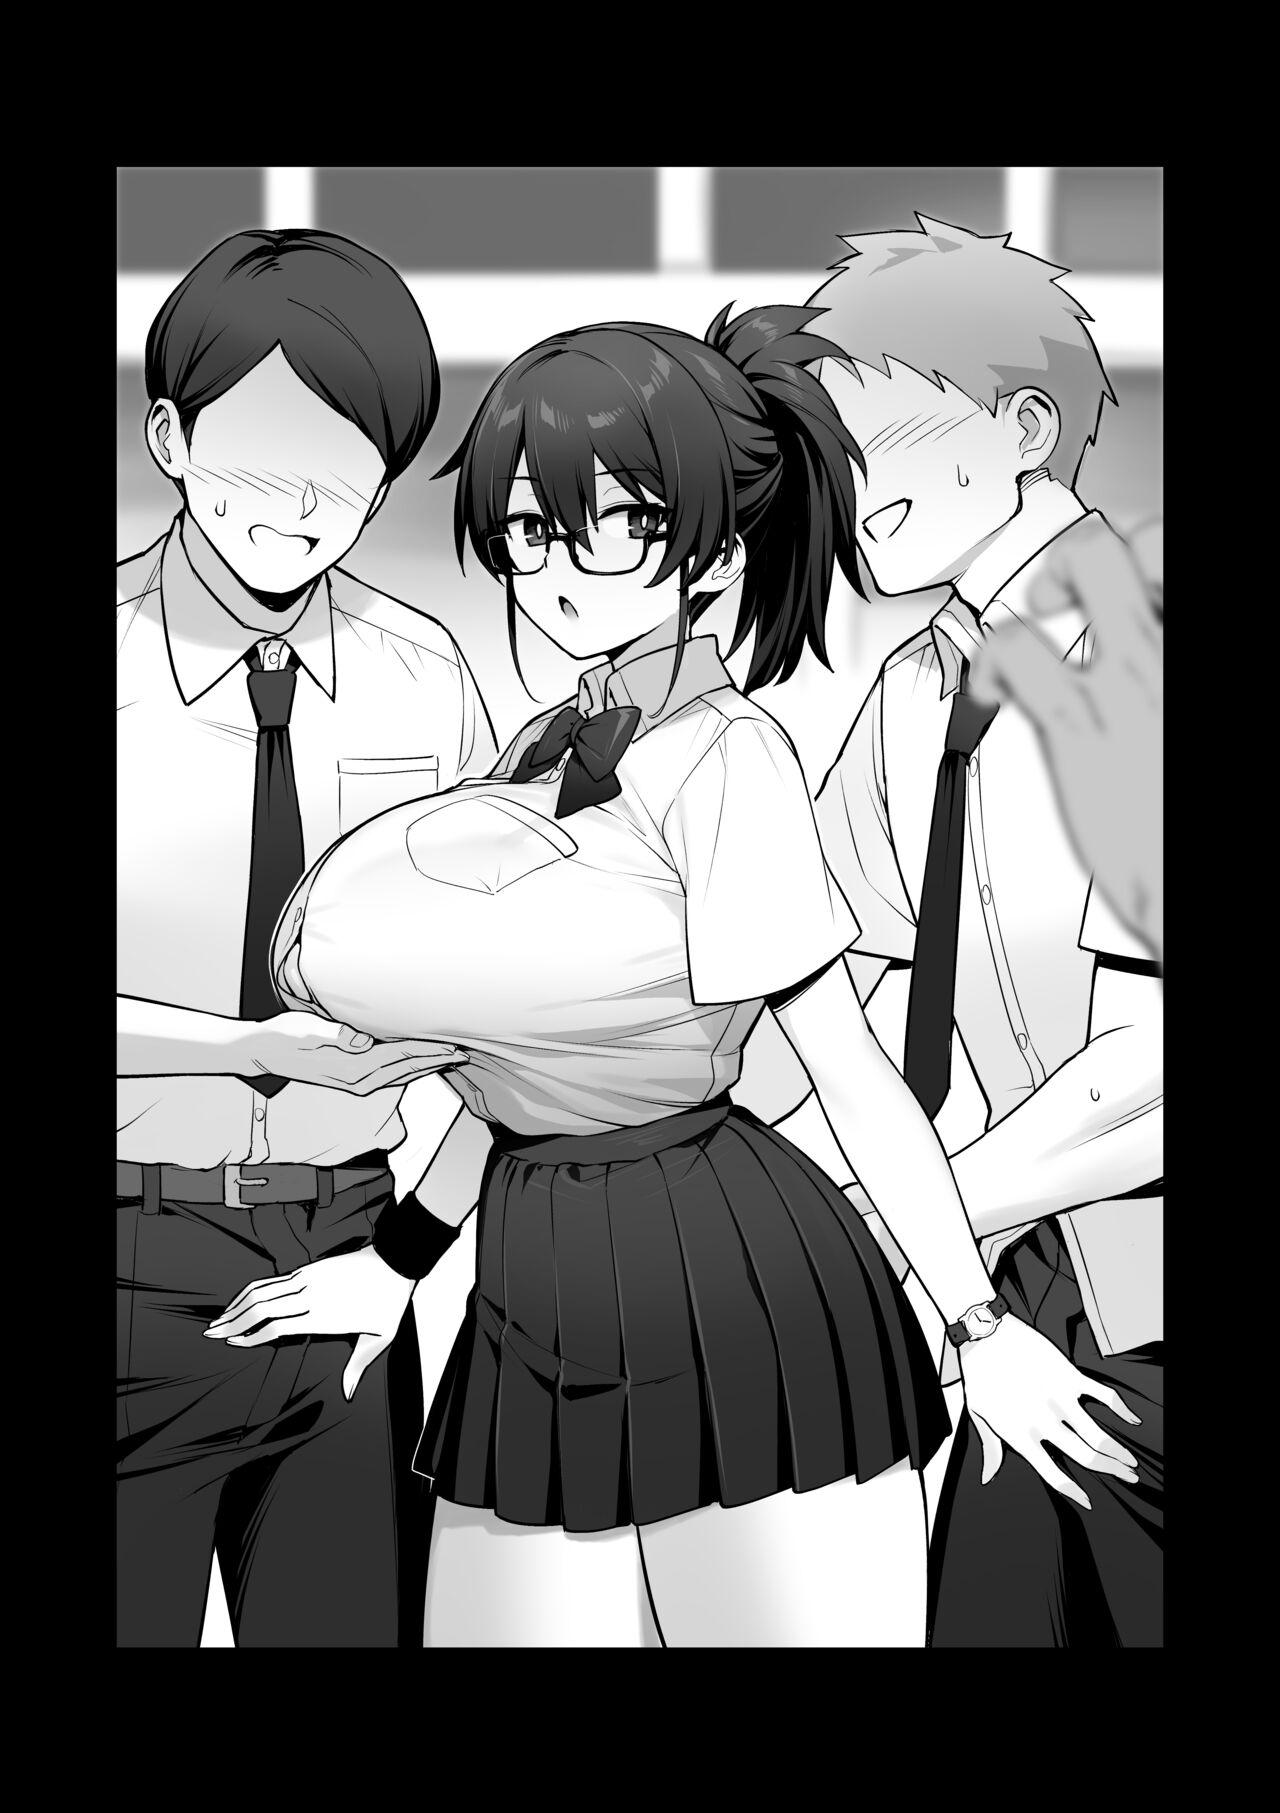 Rumor Has It That The New Chairman of Disciplinary Committee Has Huge Breasts. 27